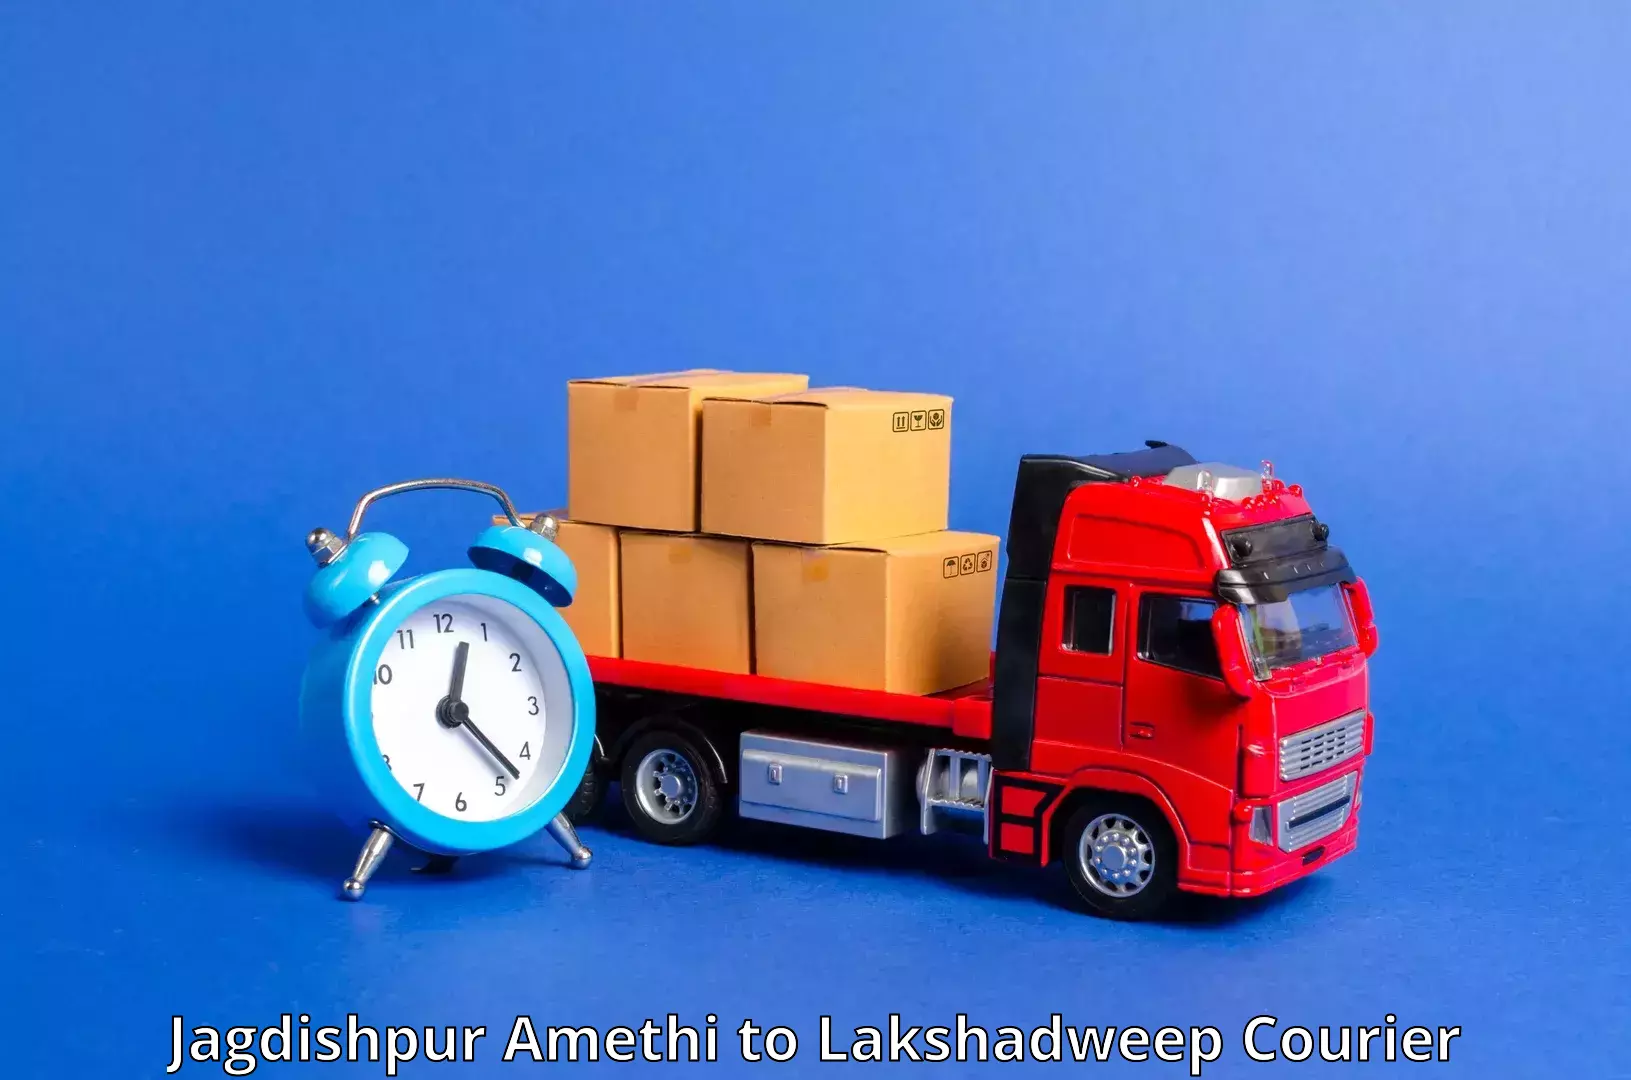 State-of-the-art courier technology Jagdishpur Amethi to Lakshadweep